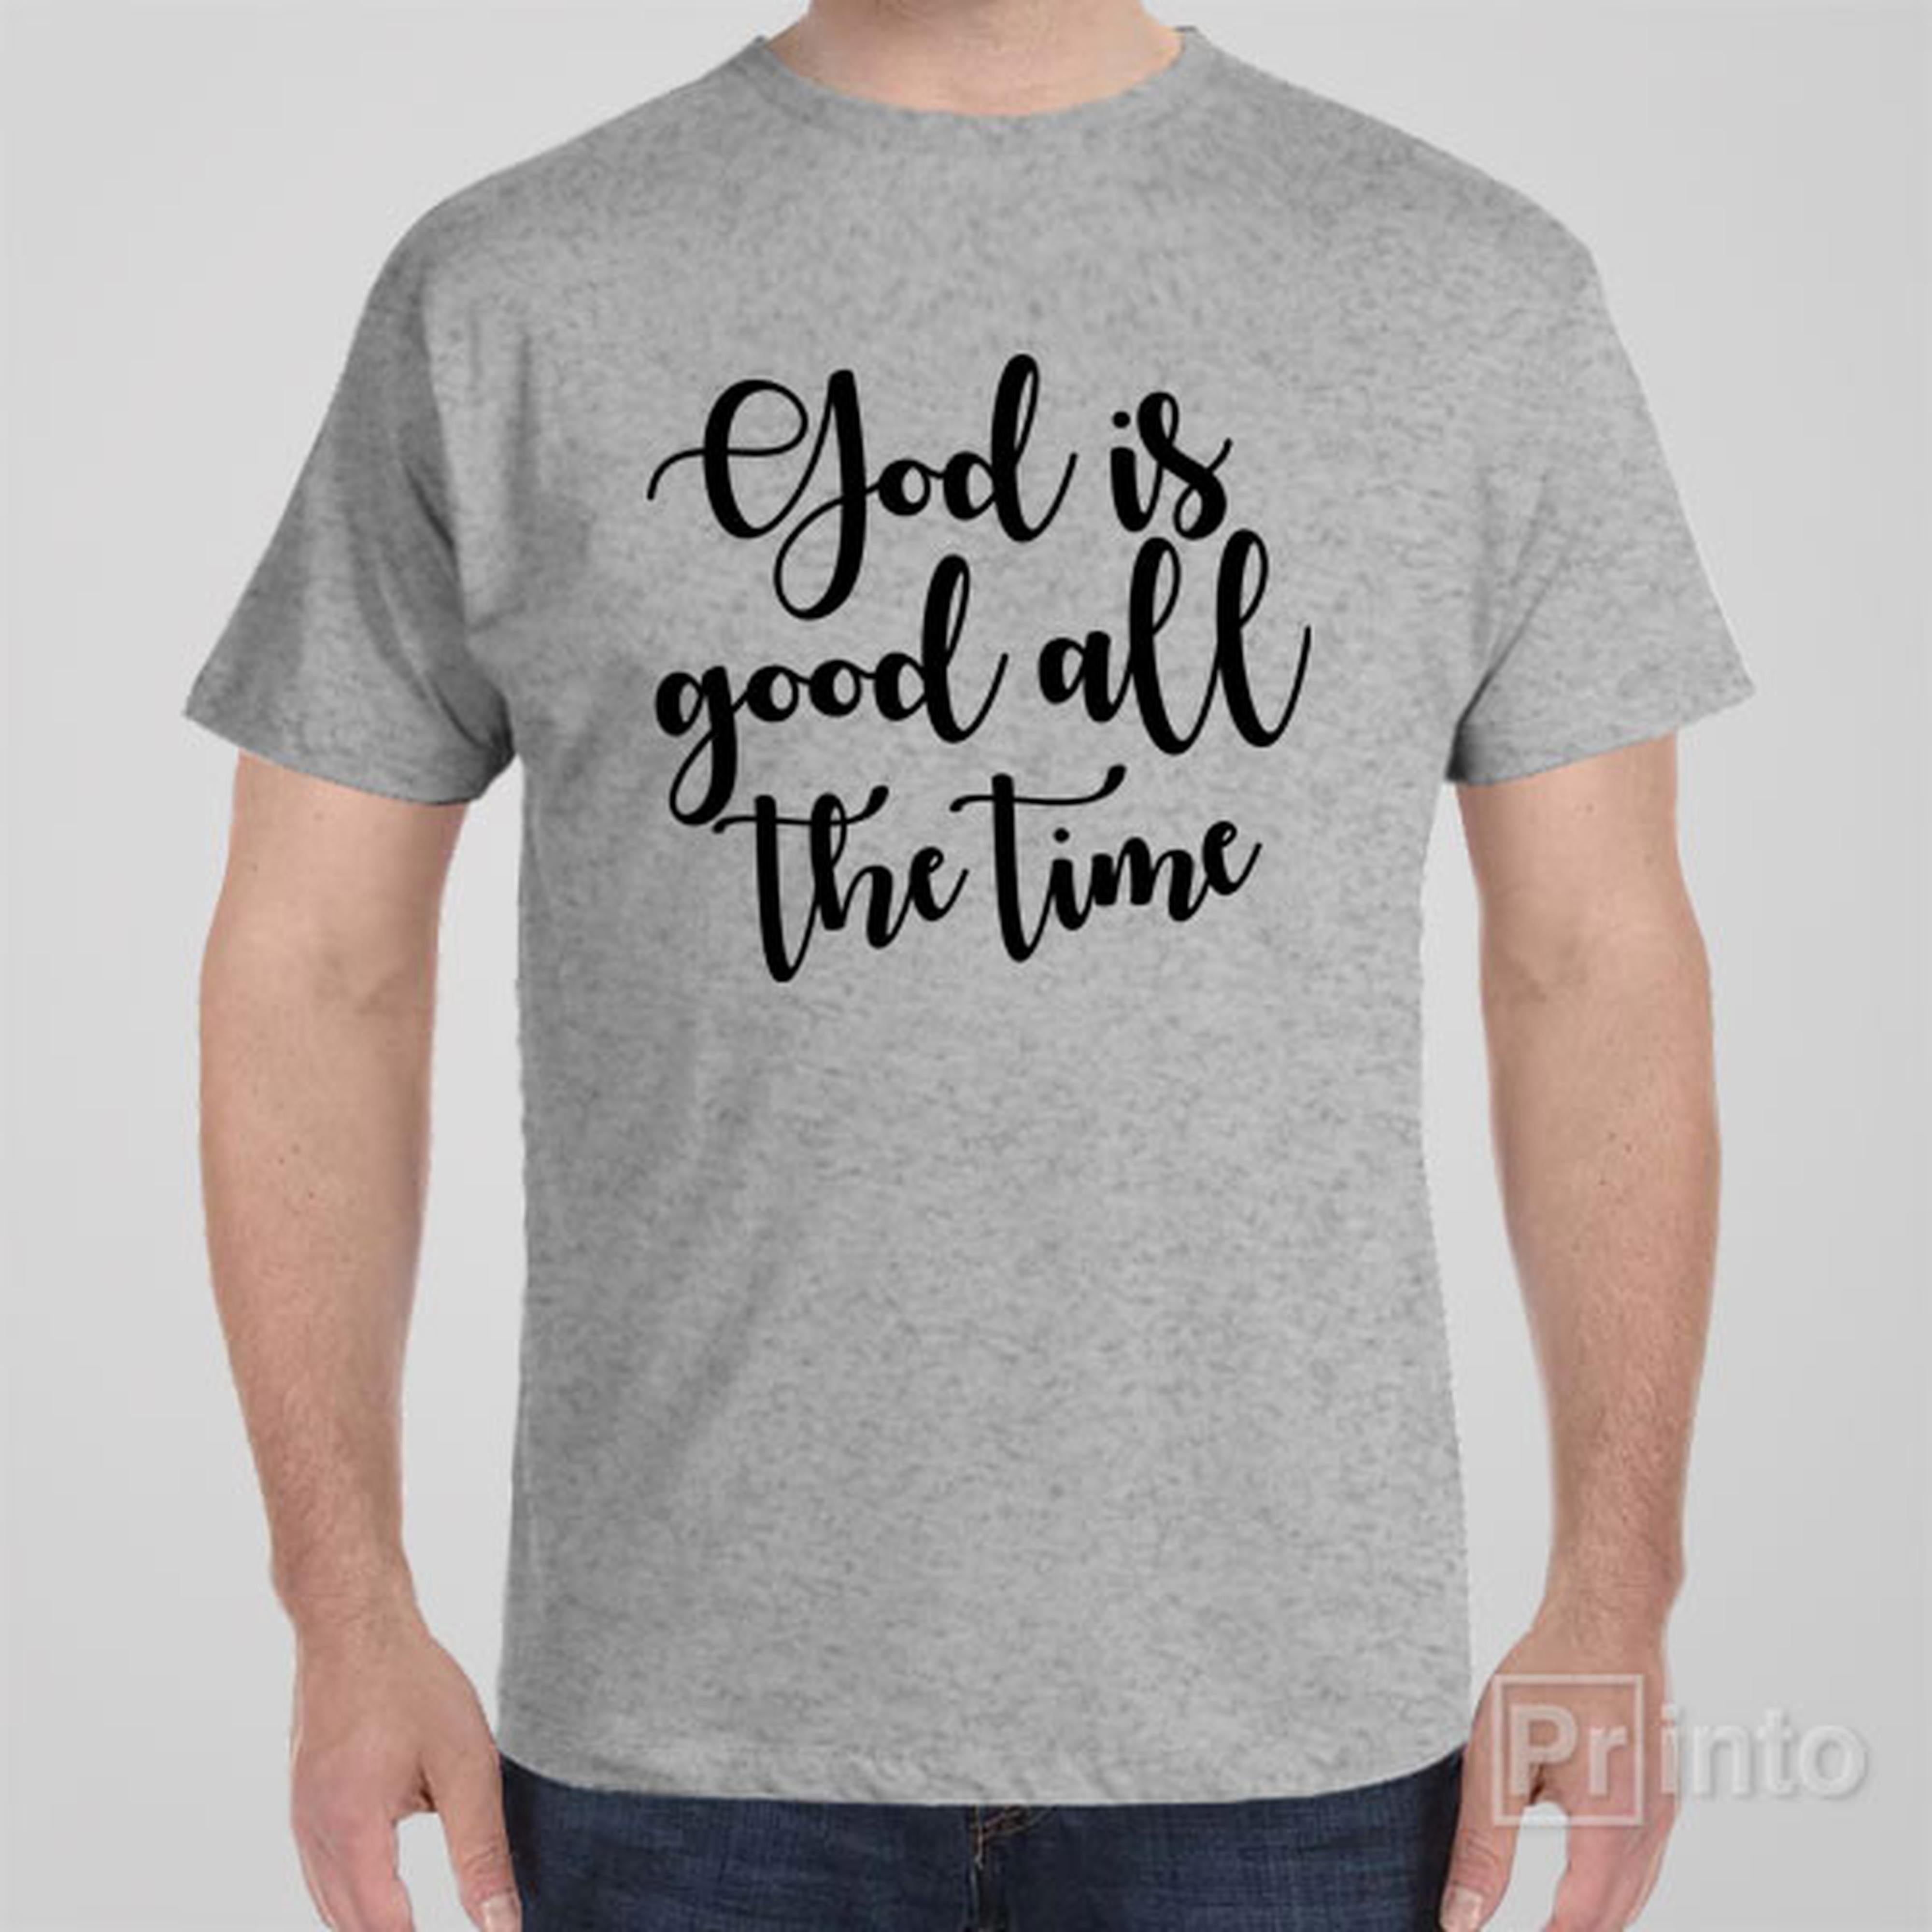 god-is-good-all-the-time-t-shirt